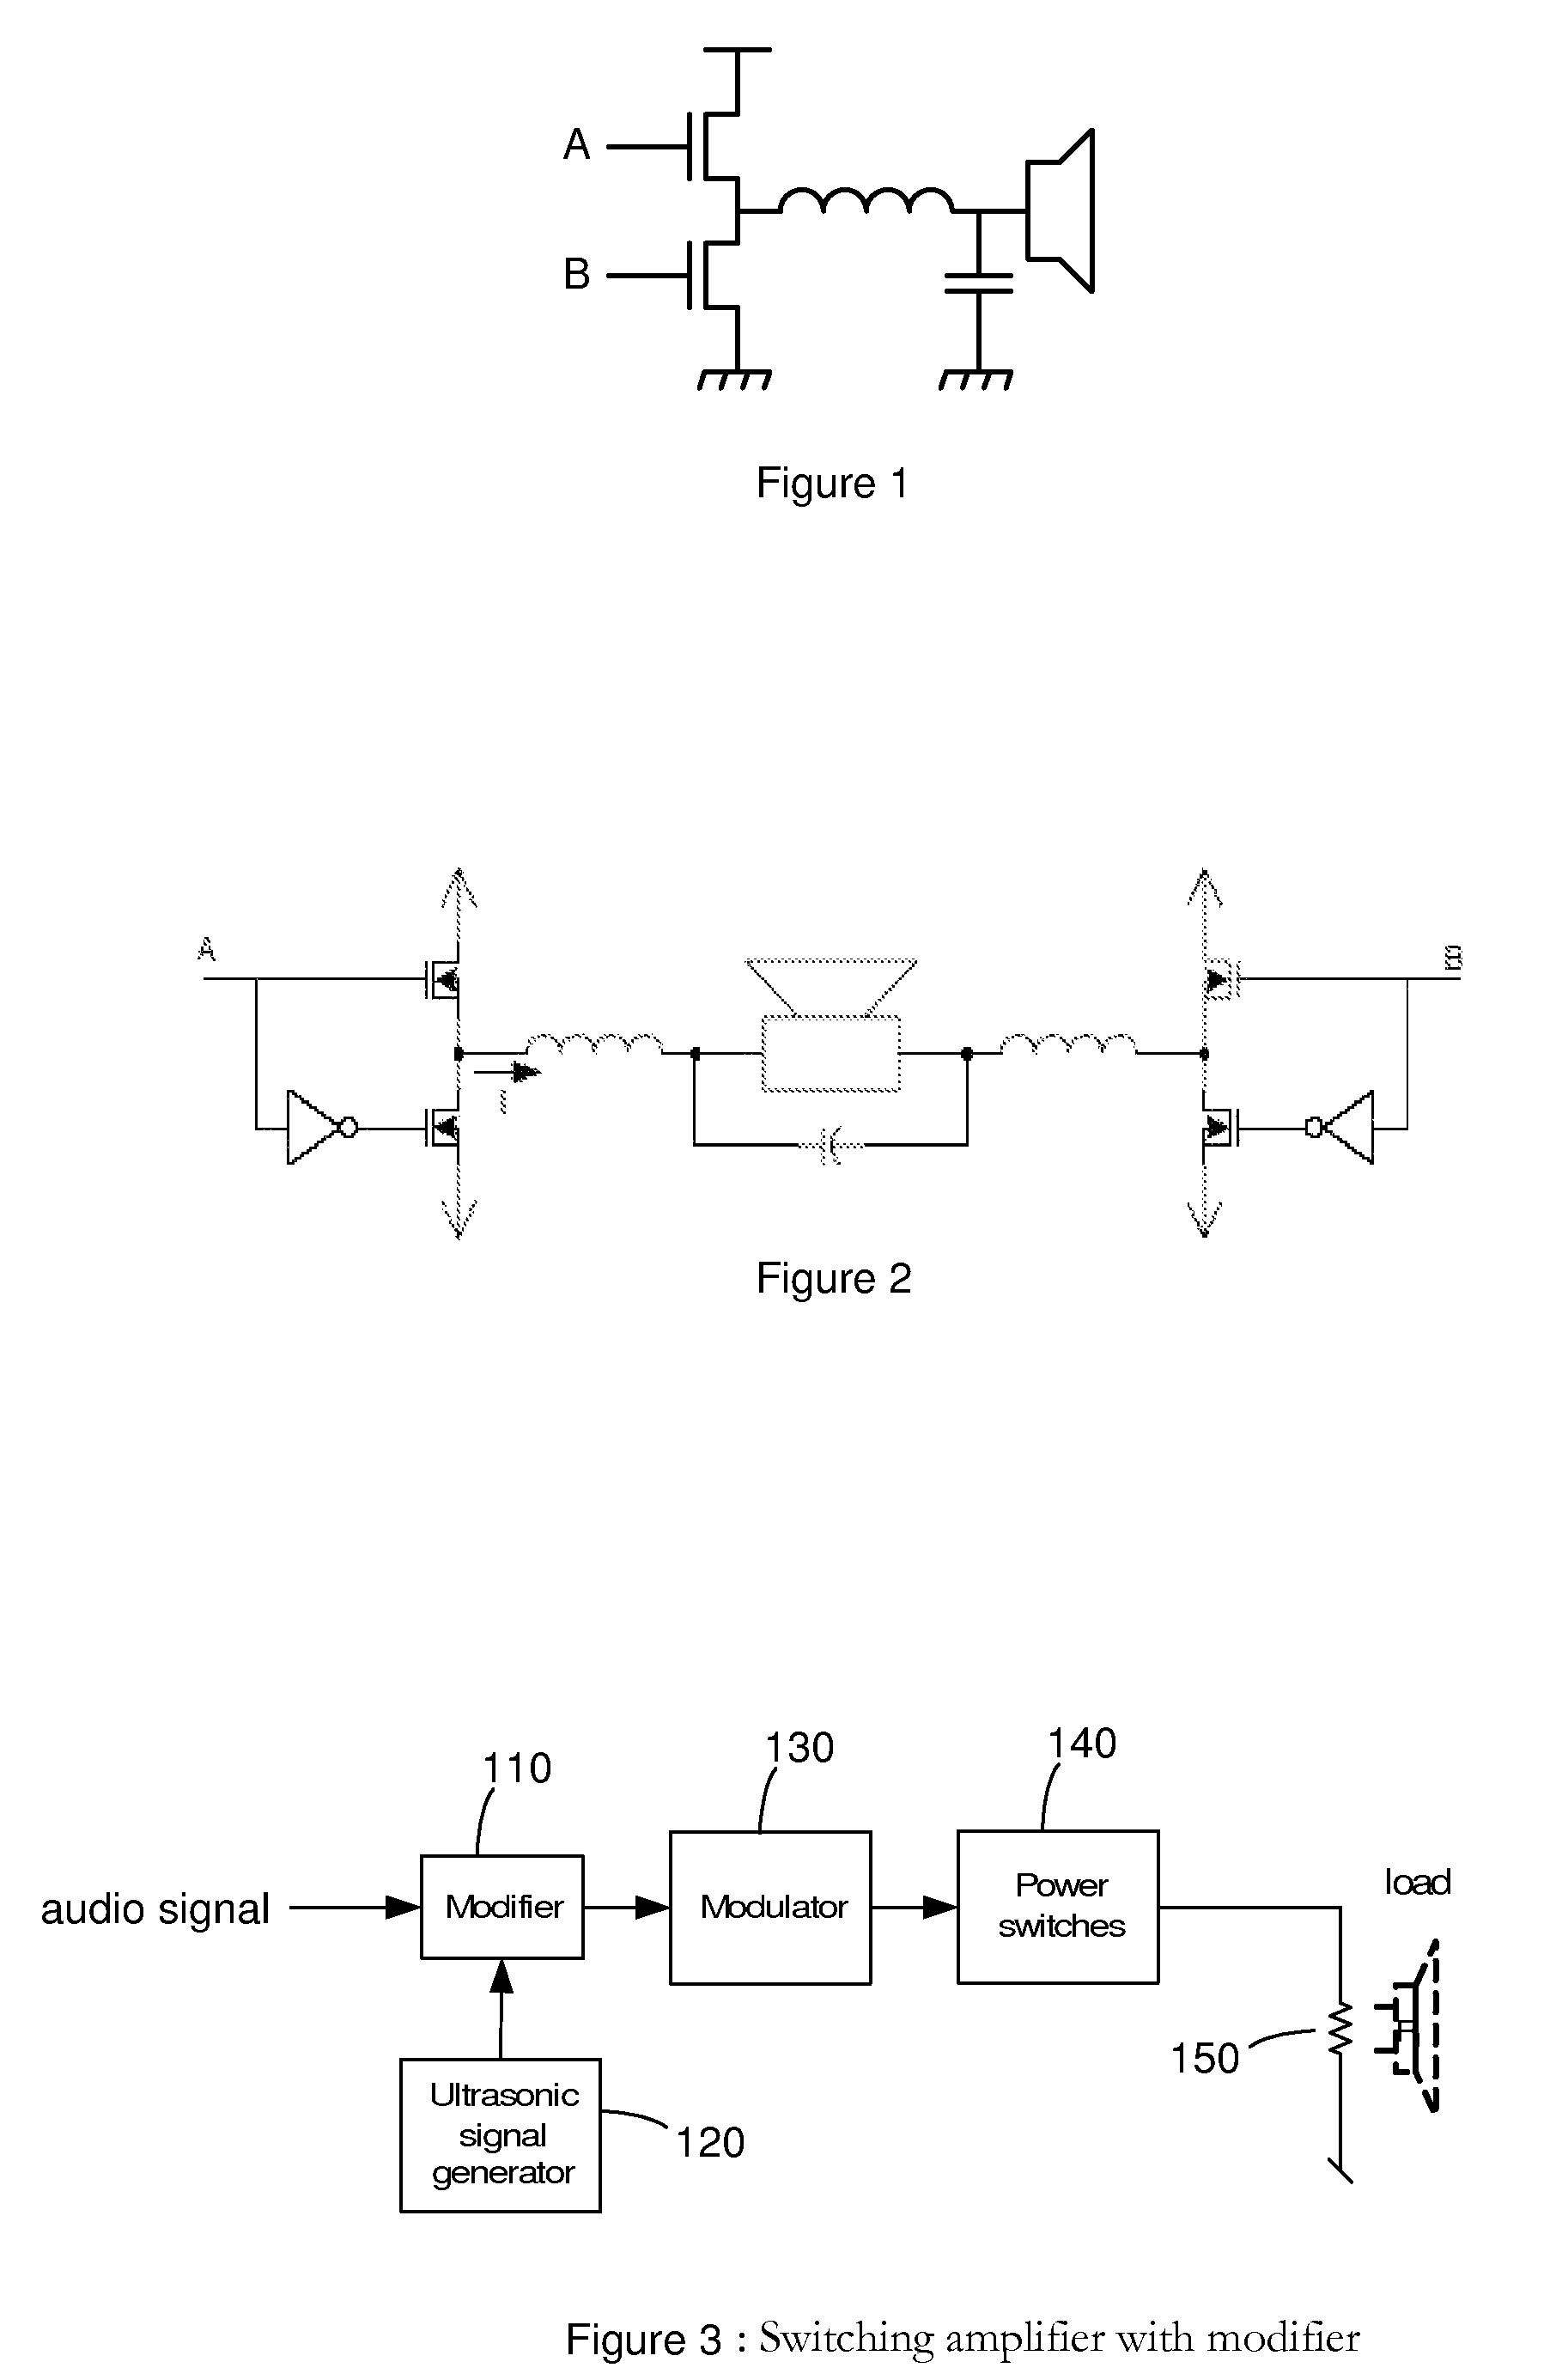 Systems and methods for improving performance in a digital amplifier by adding an ultrasonic signal to an input audio signal